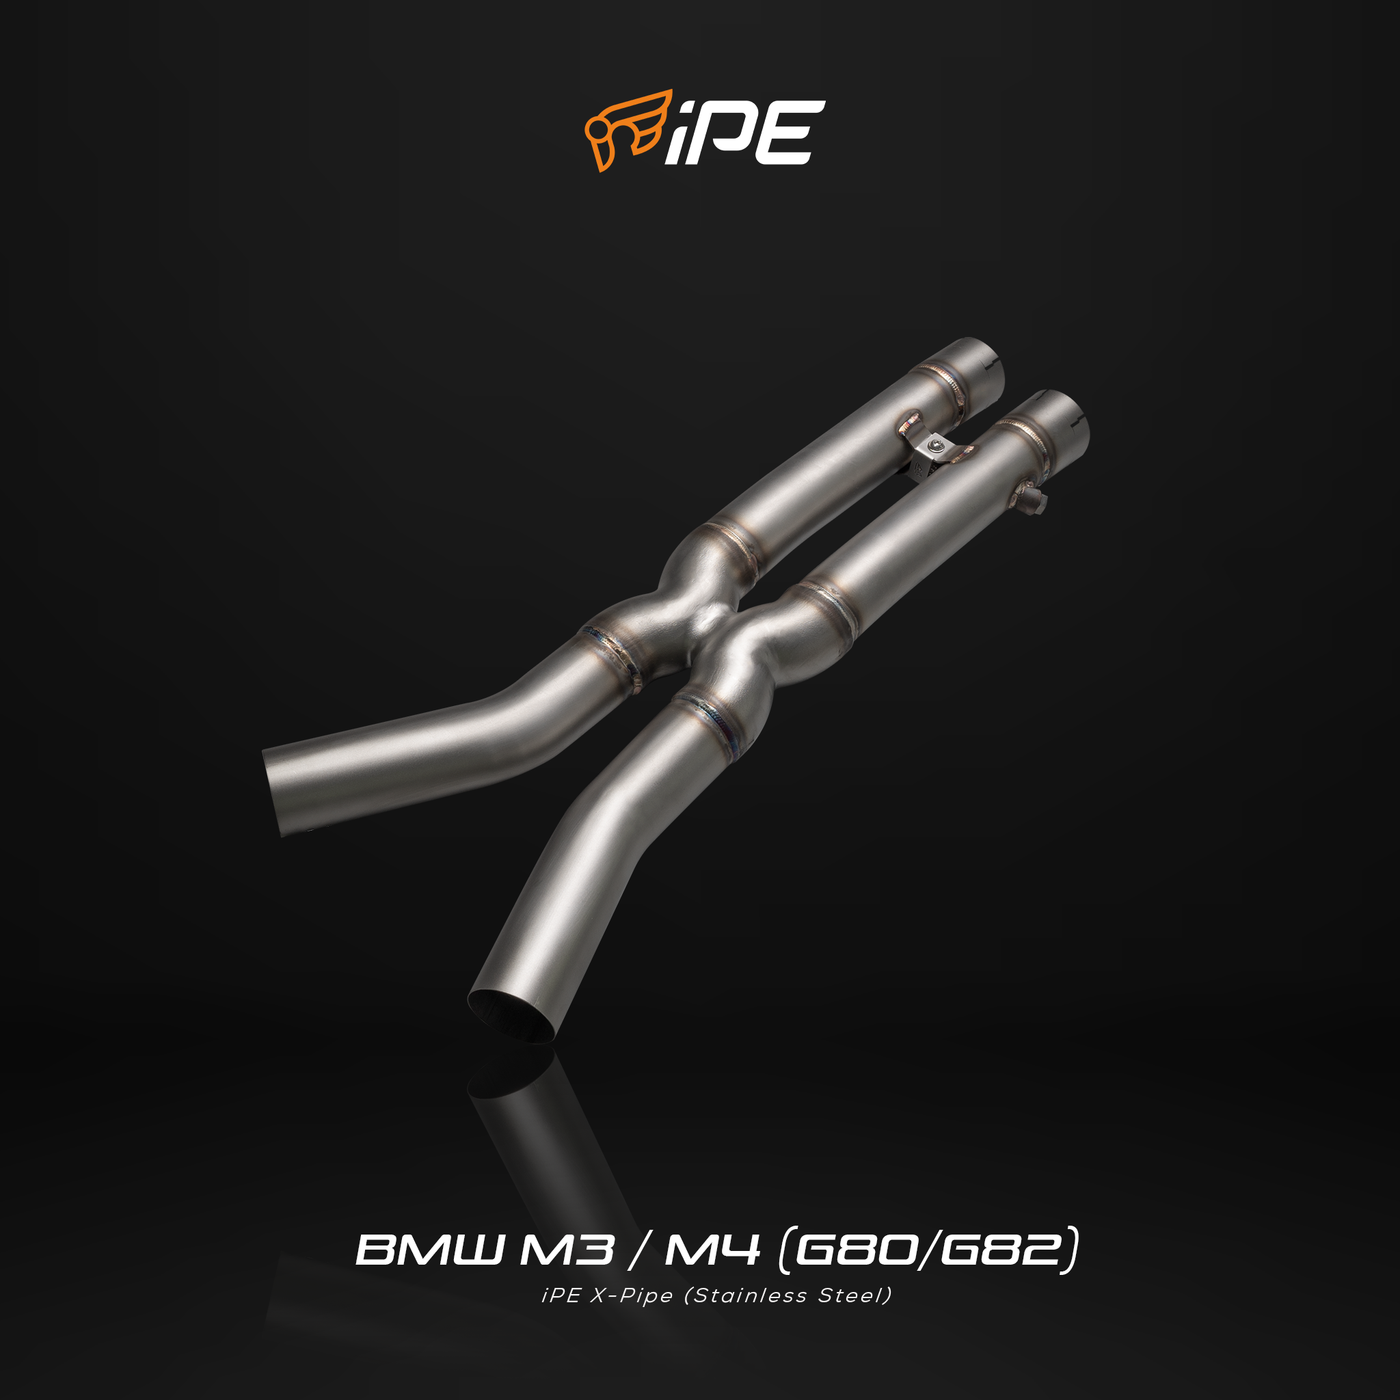 BMW G80/G82 M3/M4 Exhaust System - X-Pipe - Stainless Steel